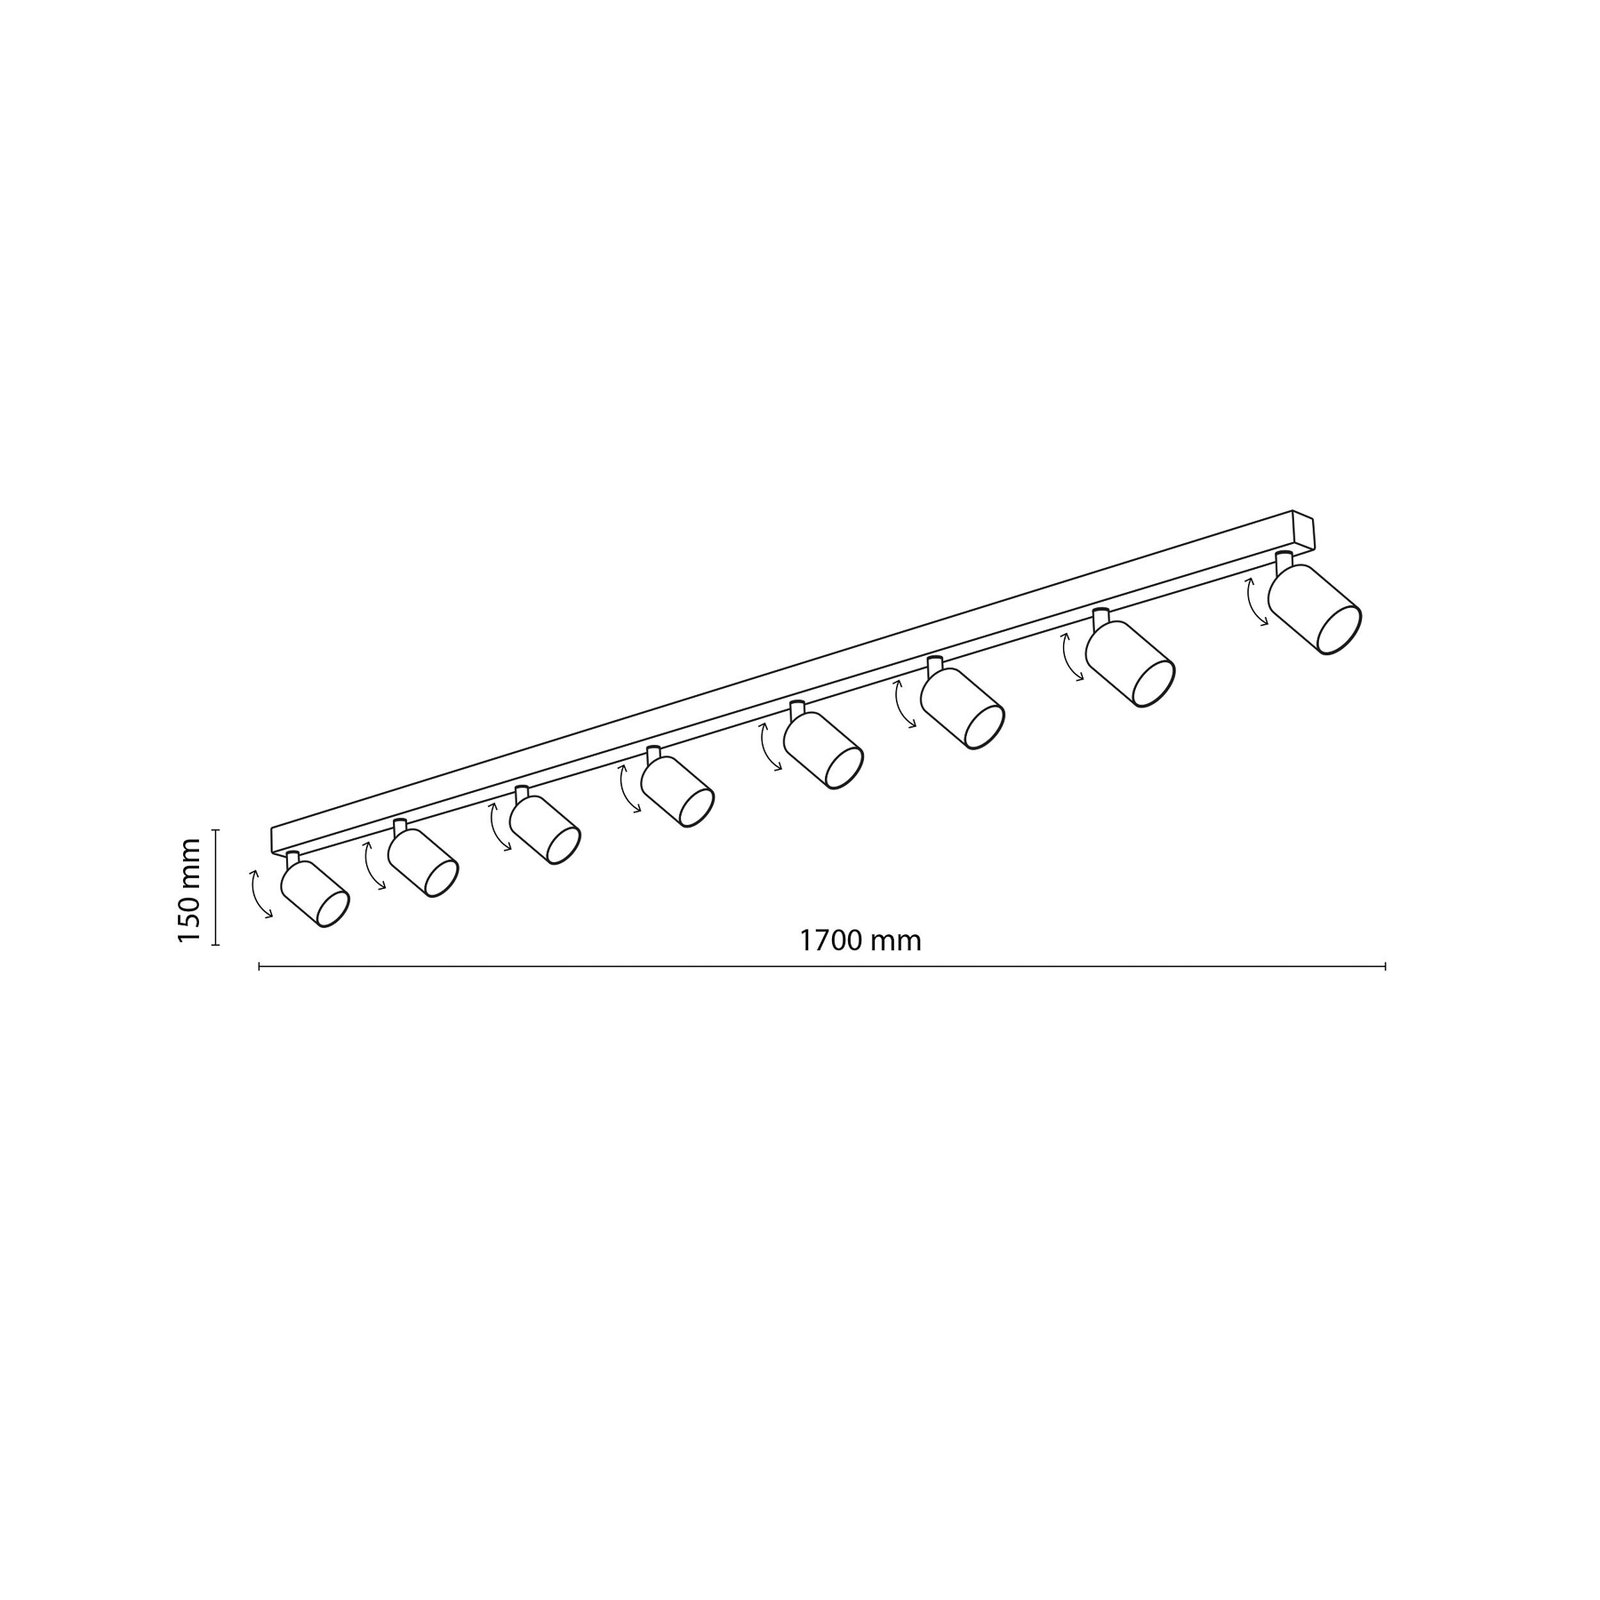 Plafón downlight Top, regulable, marrón, 8 luces lineales